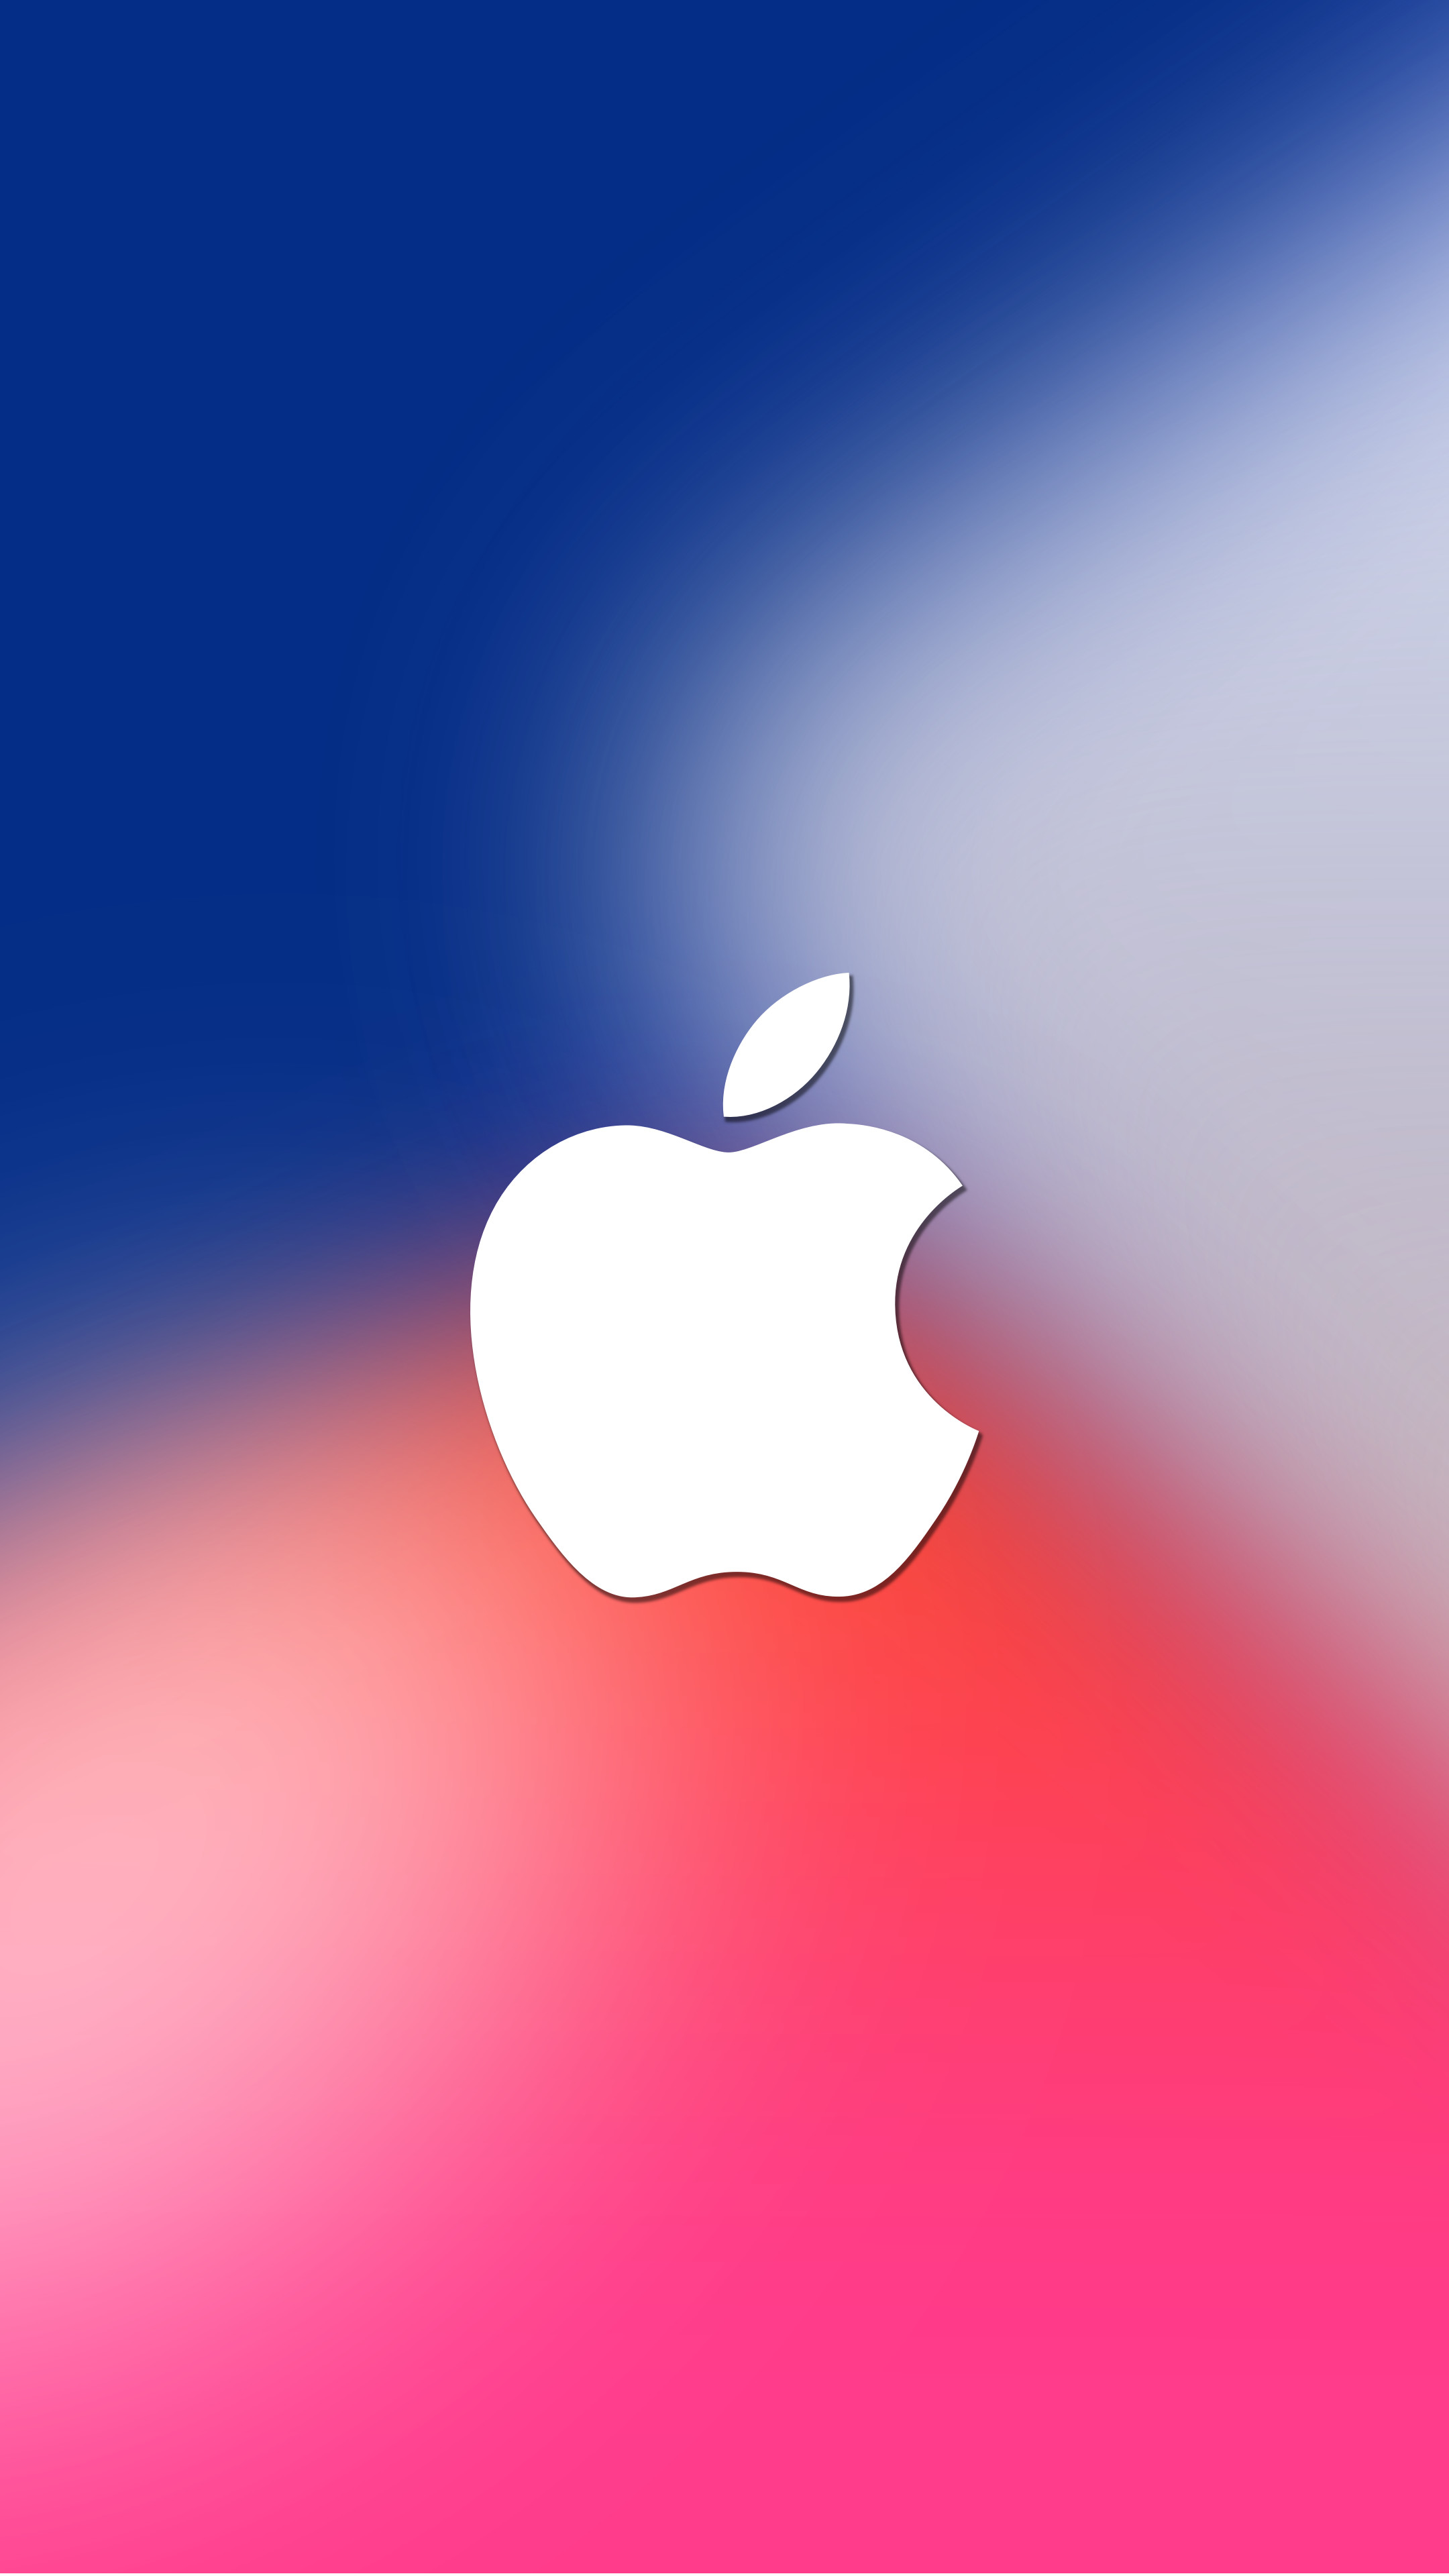 2160x3840 Title: iPhone 8 keynote wallpaper. Description: Full screen color  combination with white Apple logo centered in the middle of the theme.  Resolution: 1024 x ...